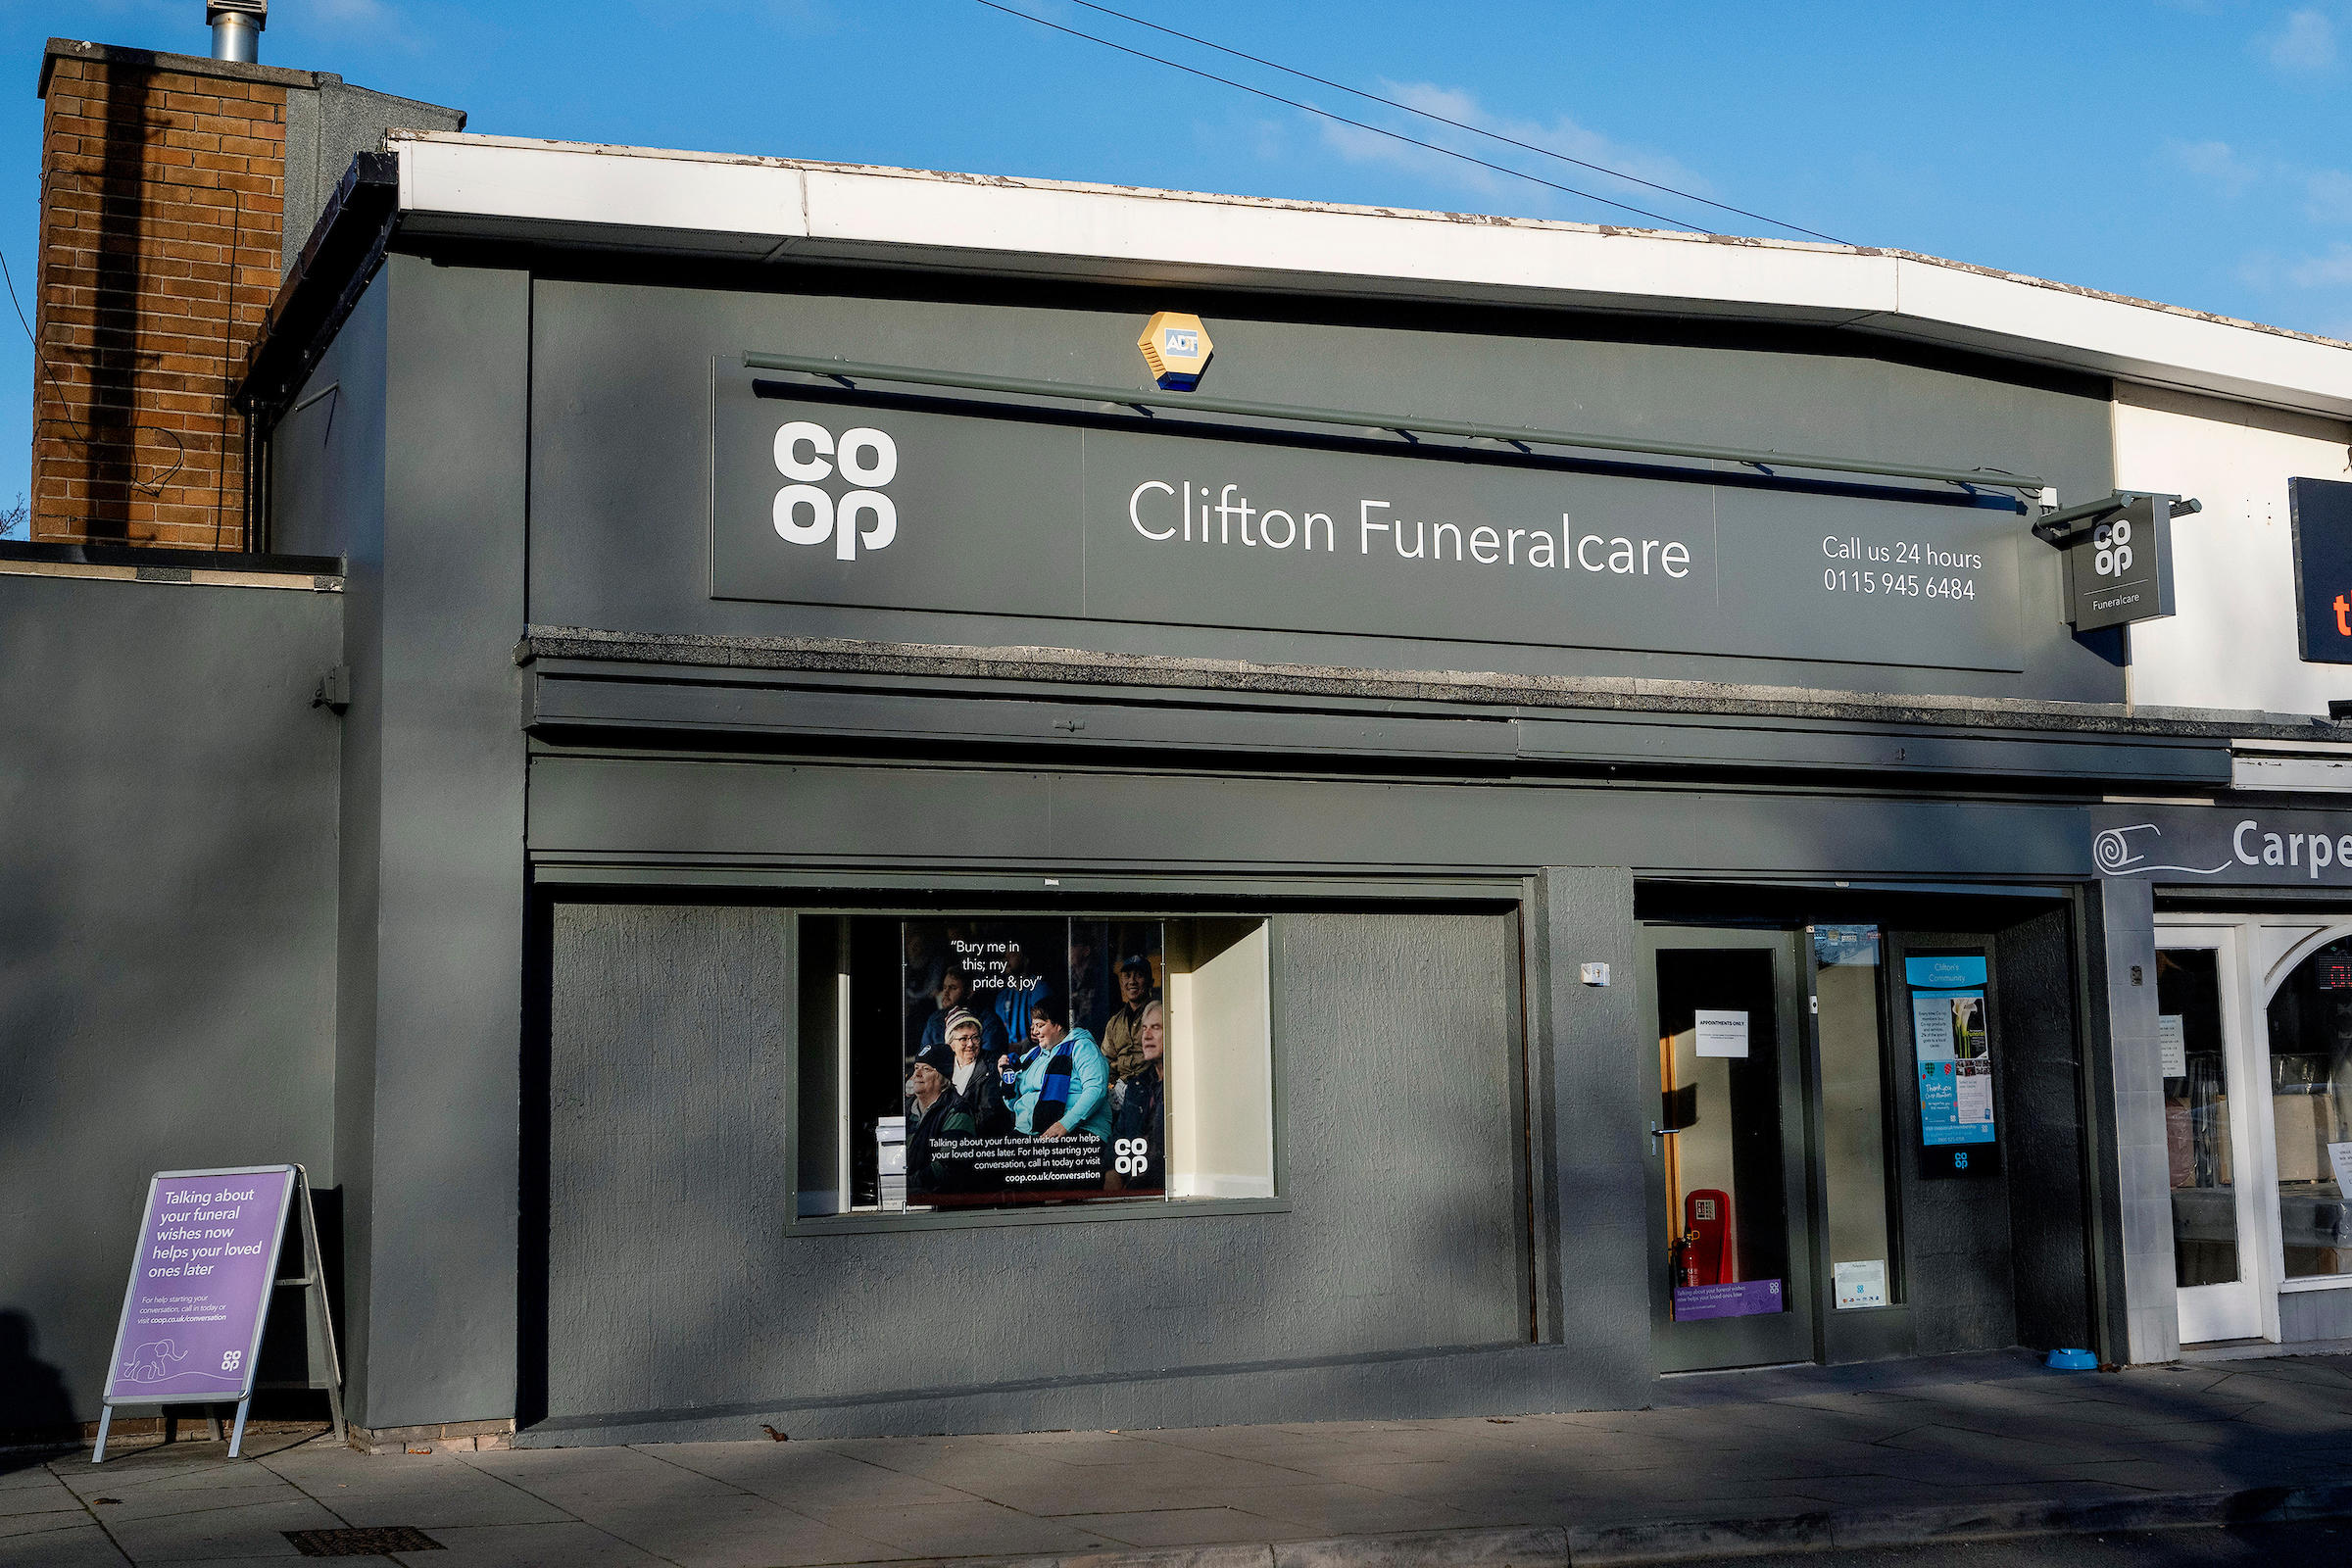 Images Co-op Funeralcare, Clifton